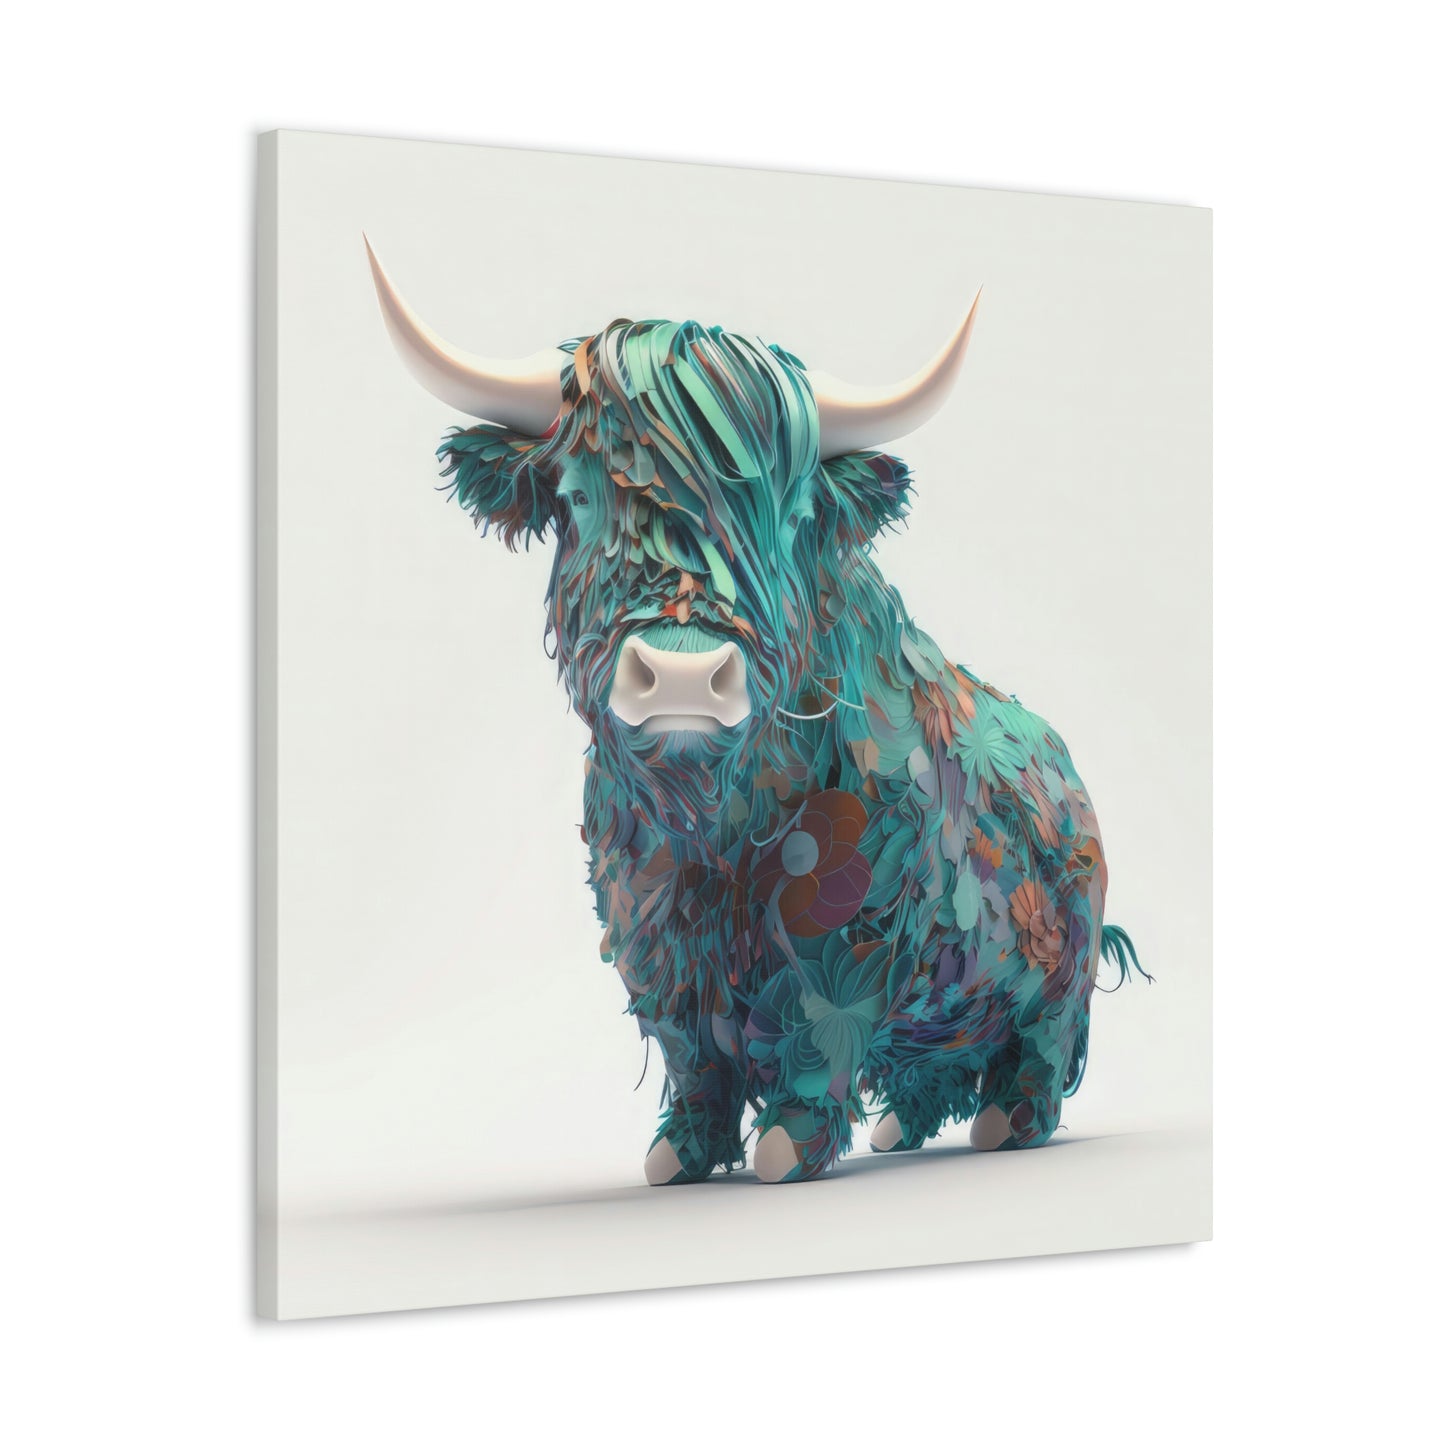 Playful Moos: Meet Moonsprout - Highland Cow Kids Collection